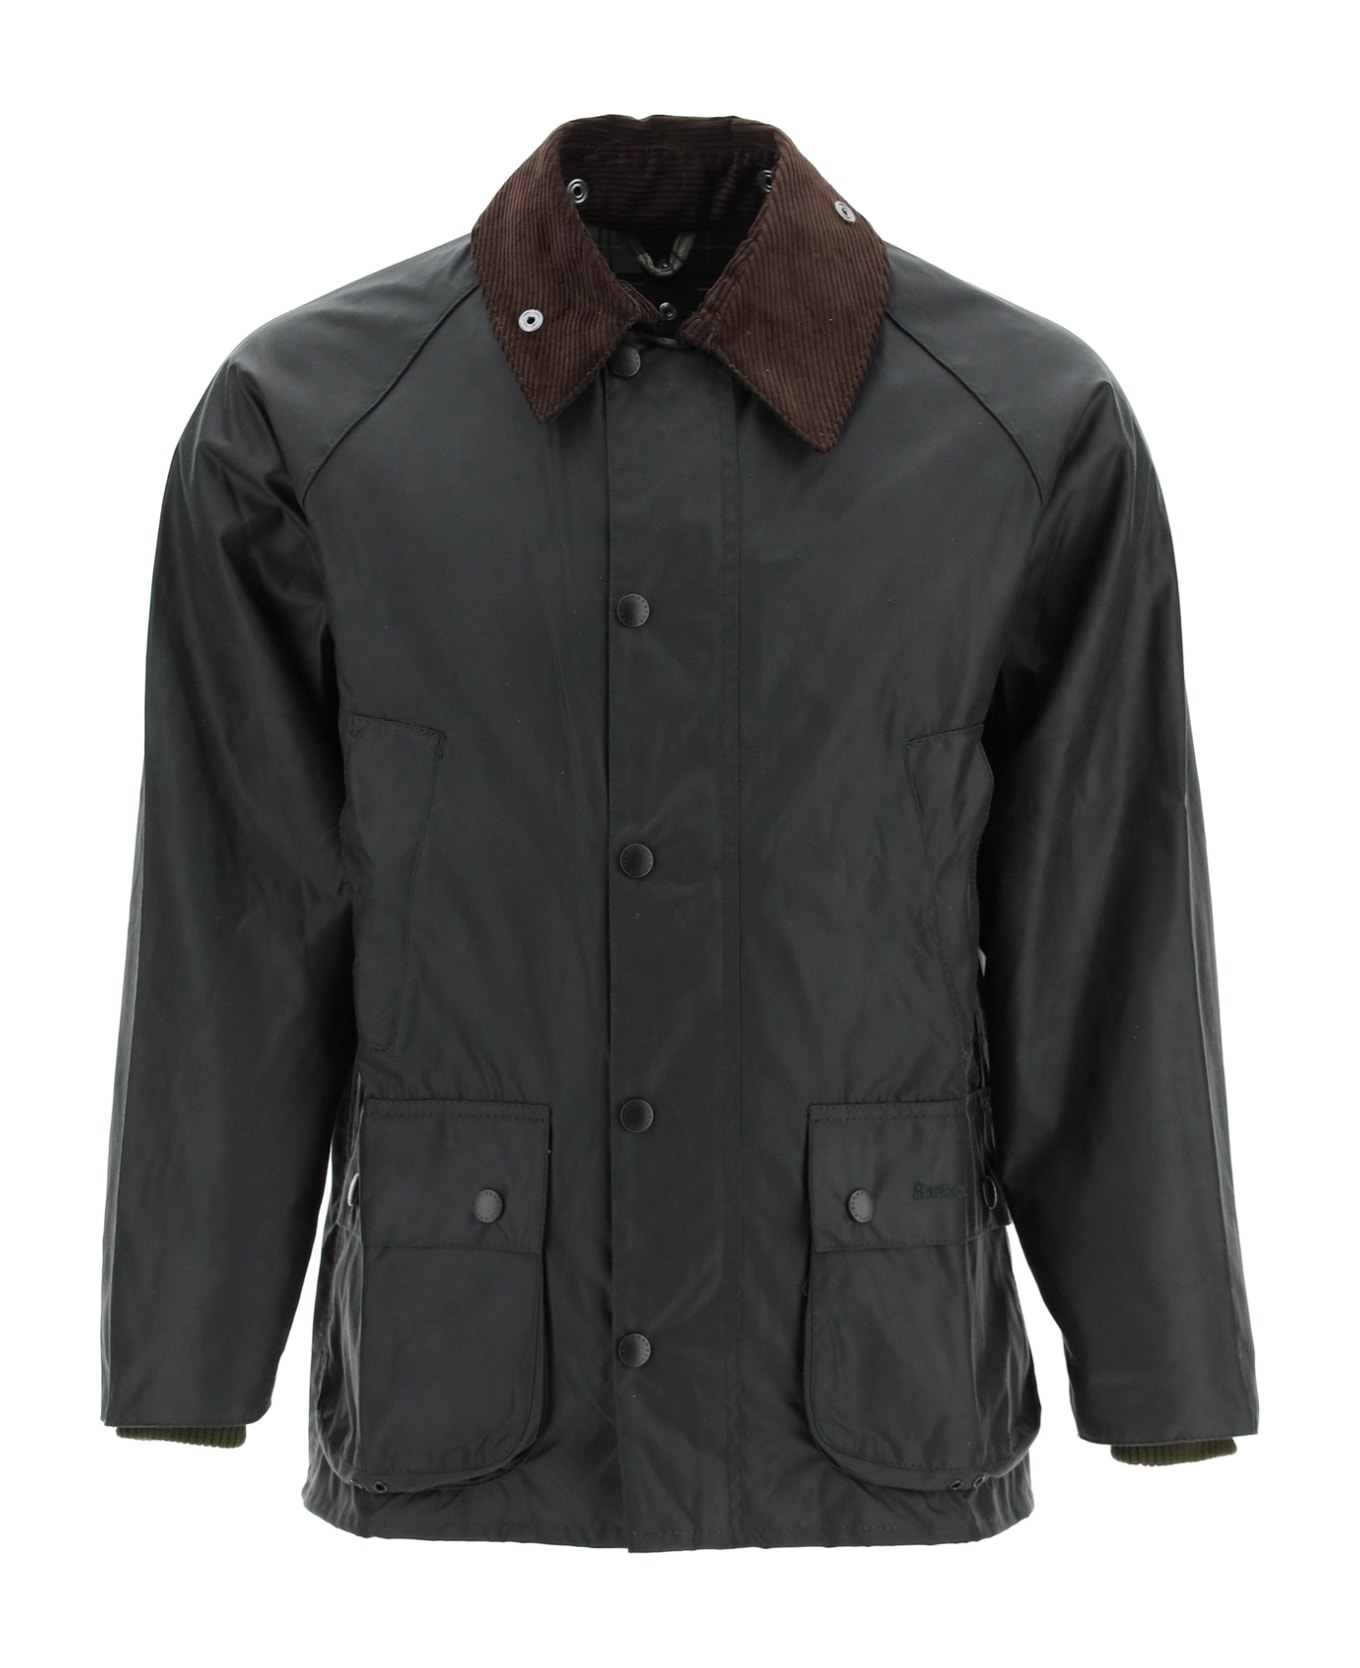 Barbour Bedale Waxed Jacket - SAGE (Green) ジャケット